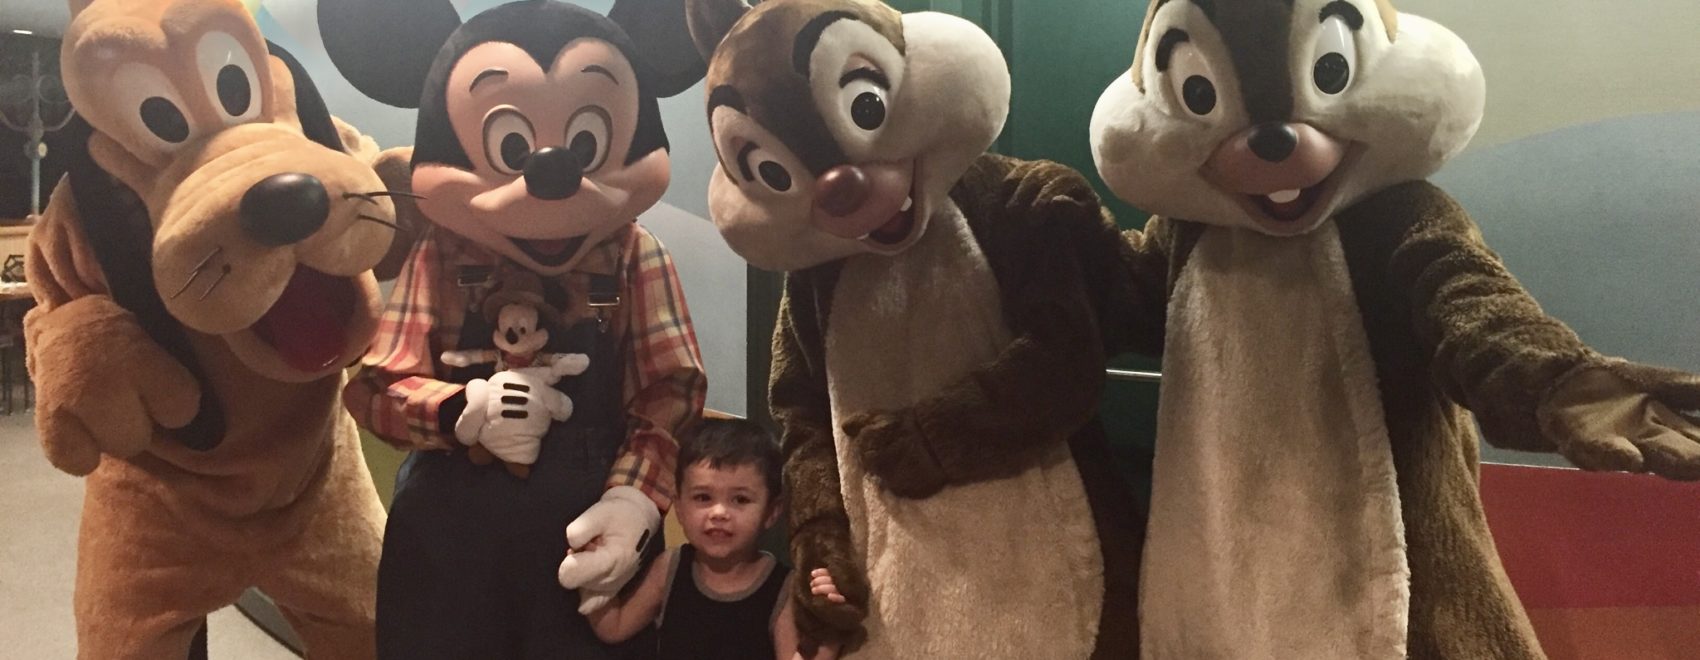 Farmer Mickey, Pluto, and Chip and Dale At Garden Grill's Character Dining Experience